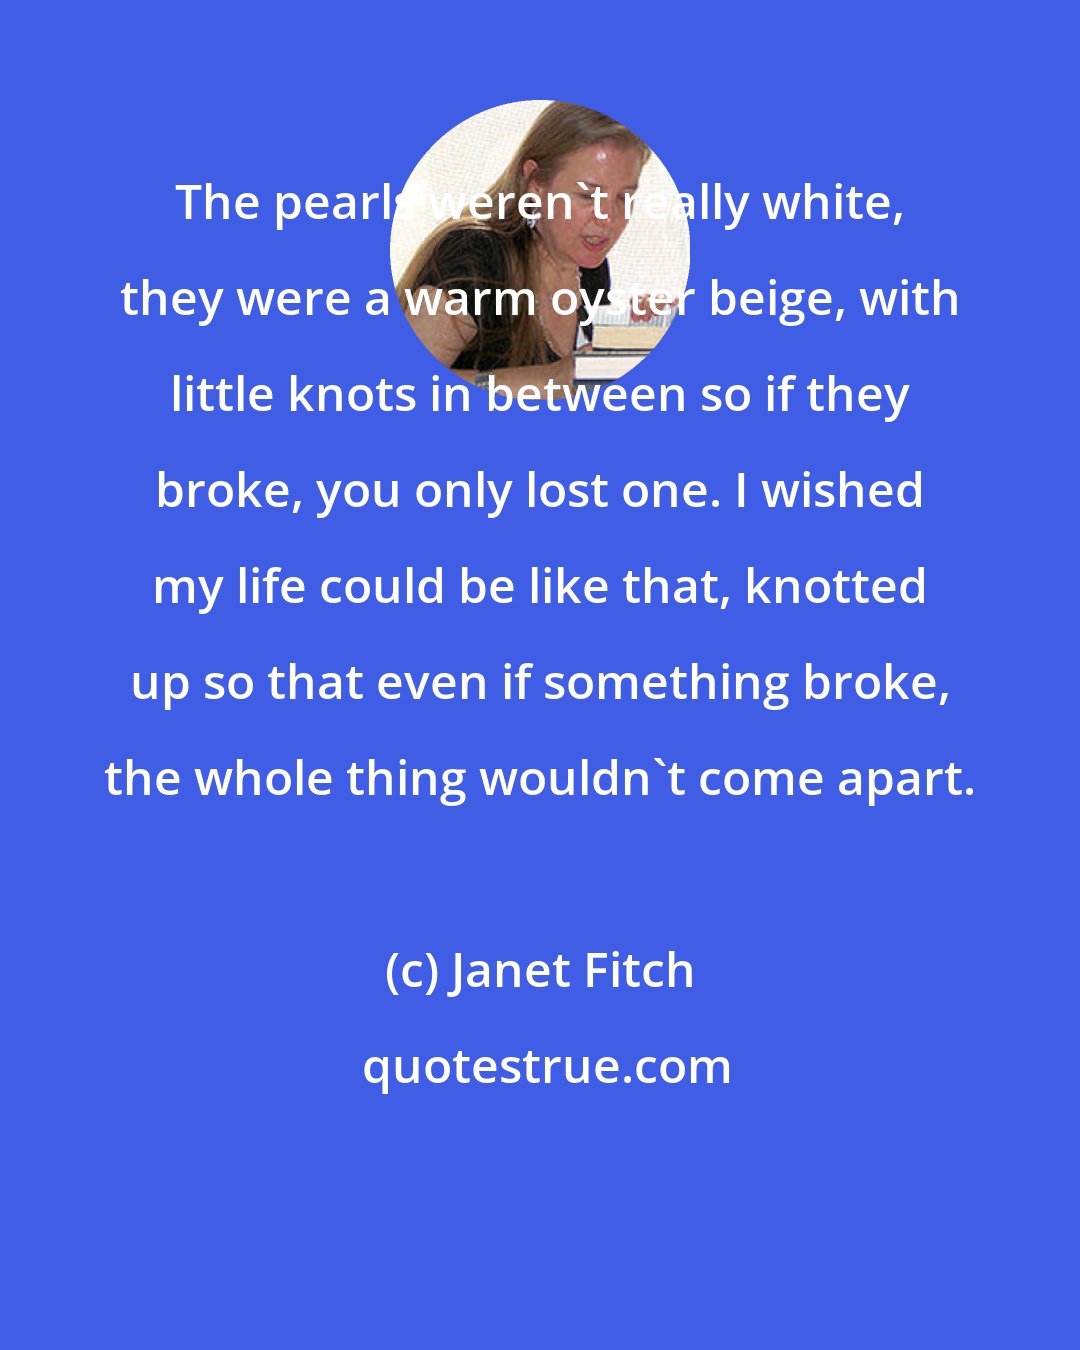 Janet Fitch: The pearls weren't really white, they were a warm oyster beige, with little knots in between so if they broke, you only lost one. I wished my life could be like that, knotted up so that even if something broke, the whole thing wouldn't come apart.